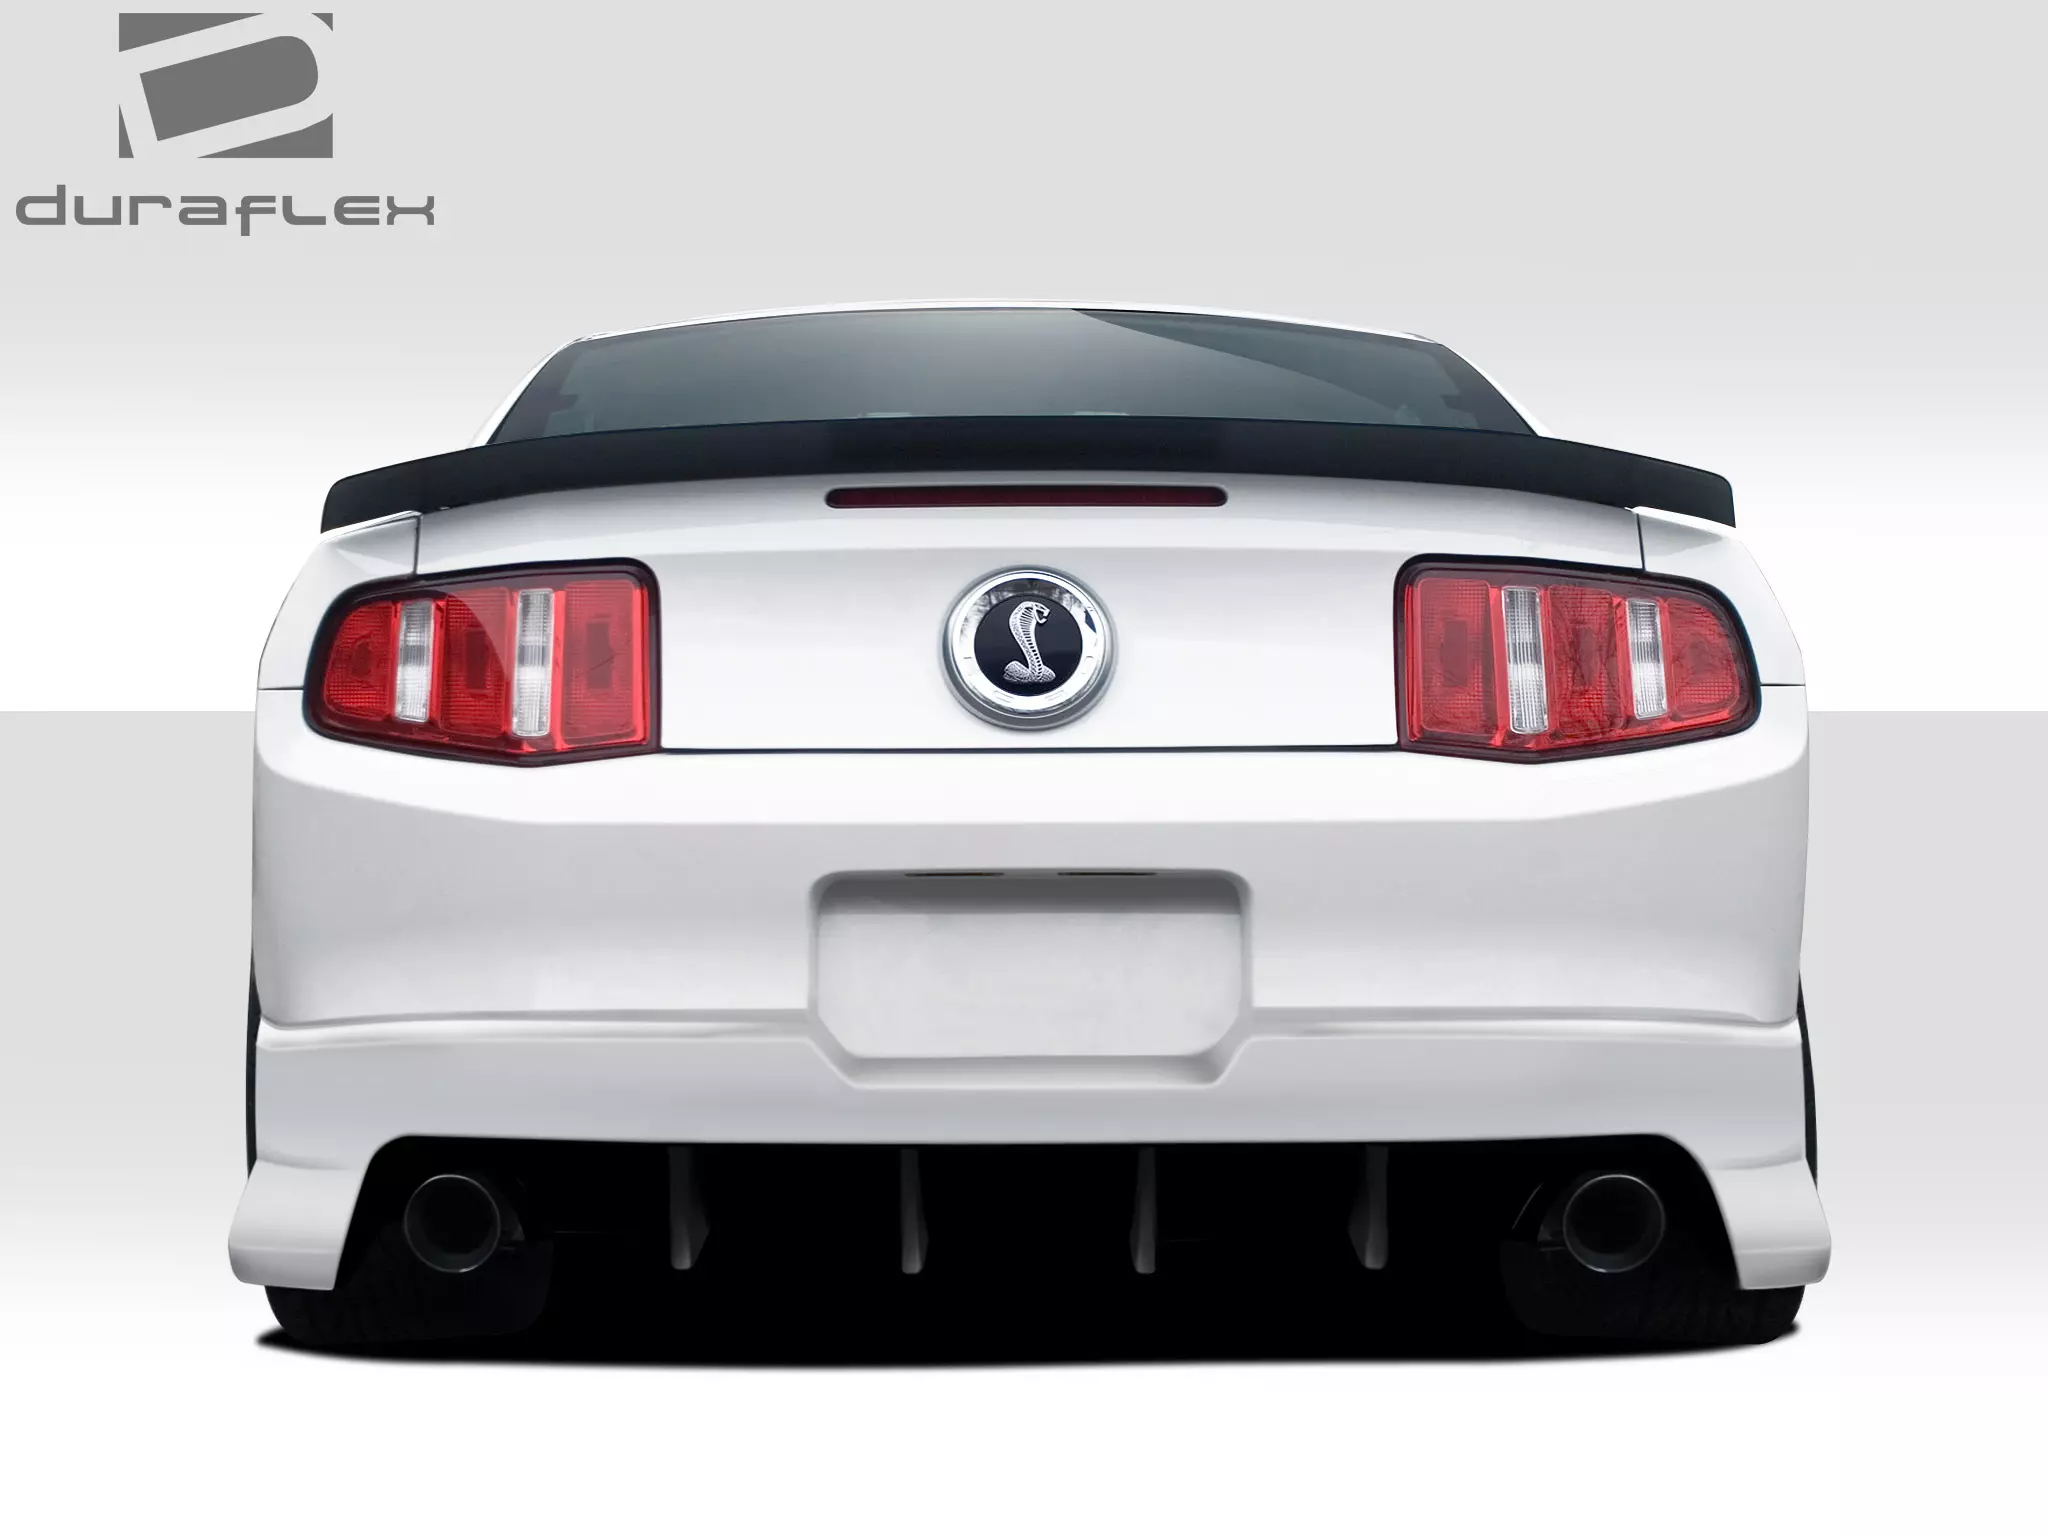 2010-2012 Ford Mustang Duraflex Circuit Rear Bumper Cover 1 Piece - Image 2